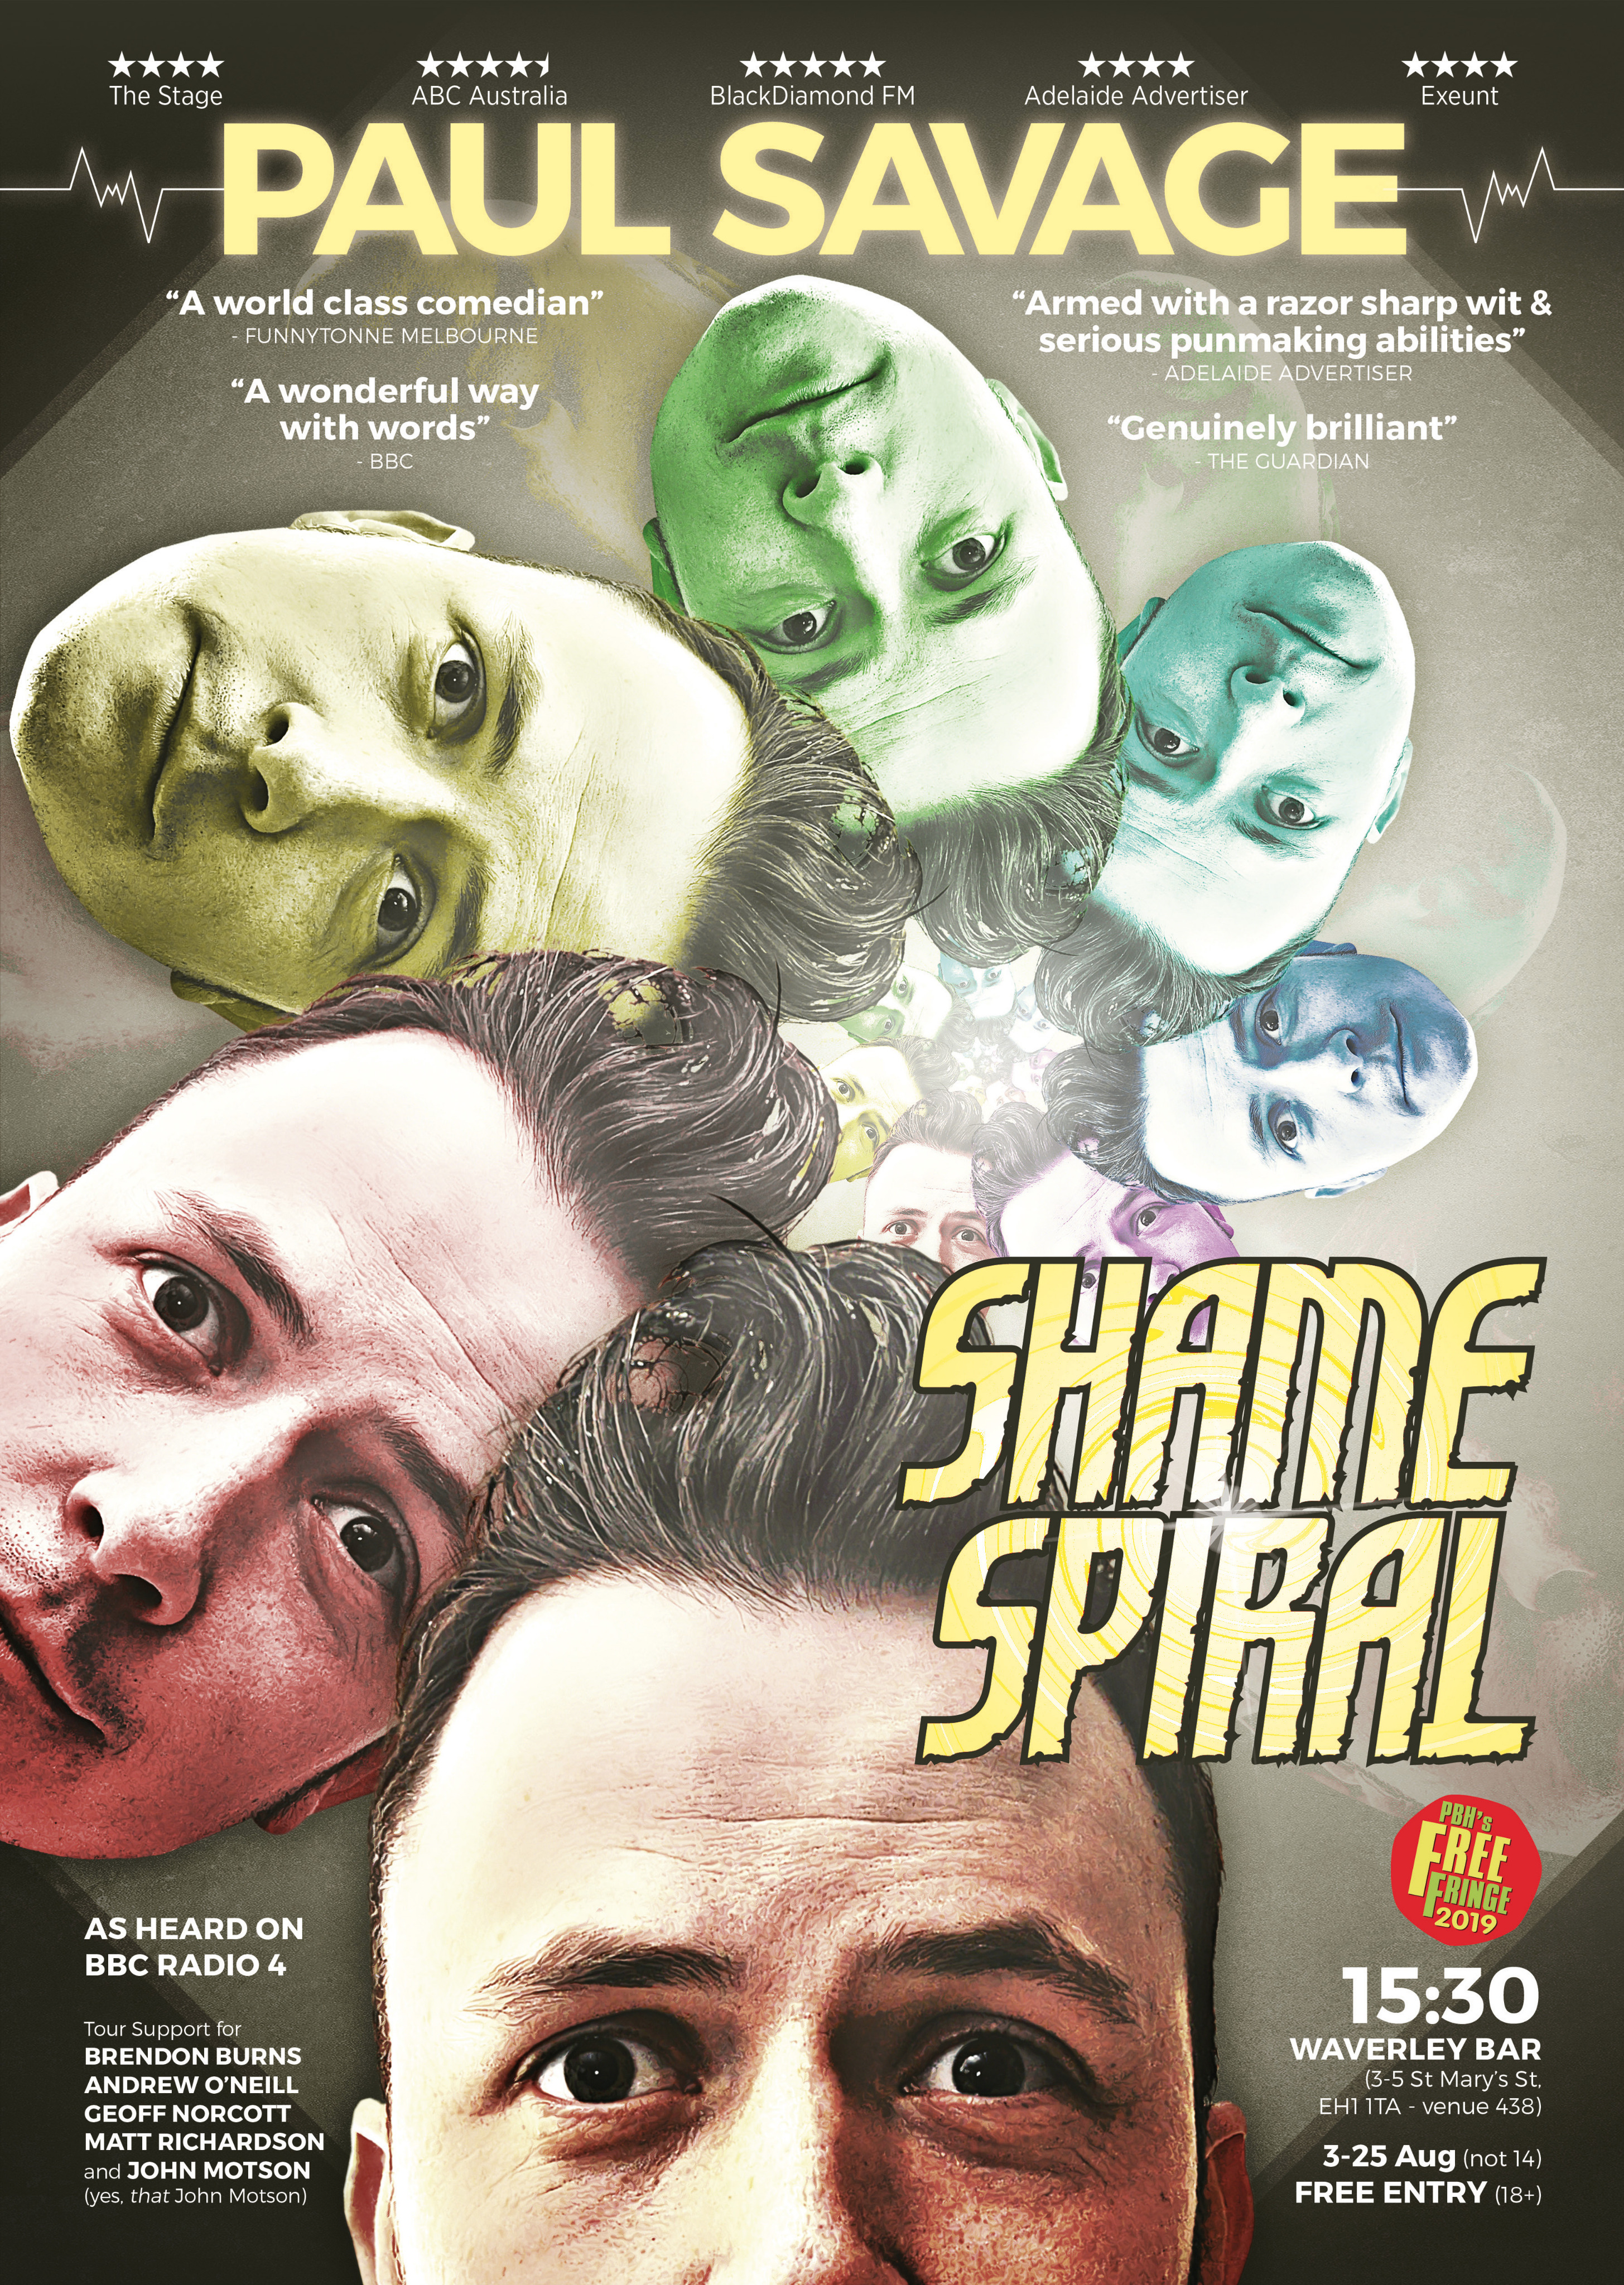 The poster for Paul Savage: Shame Spiral